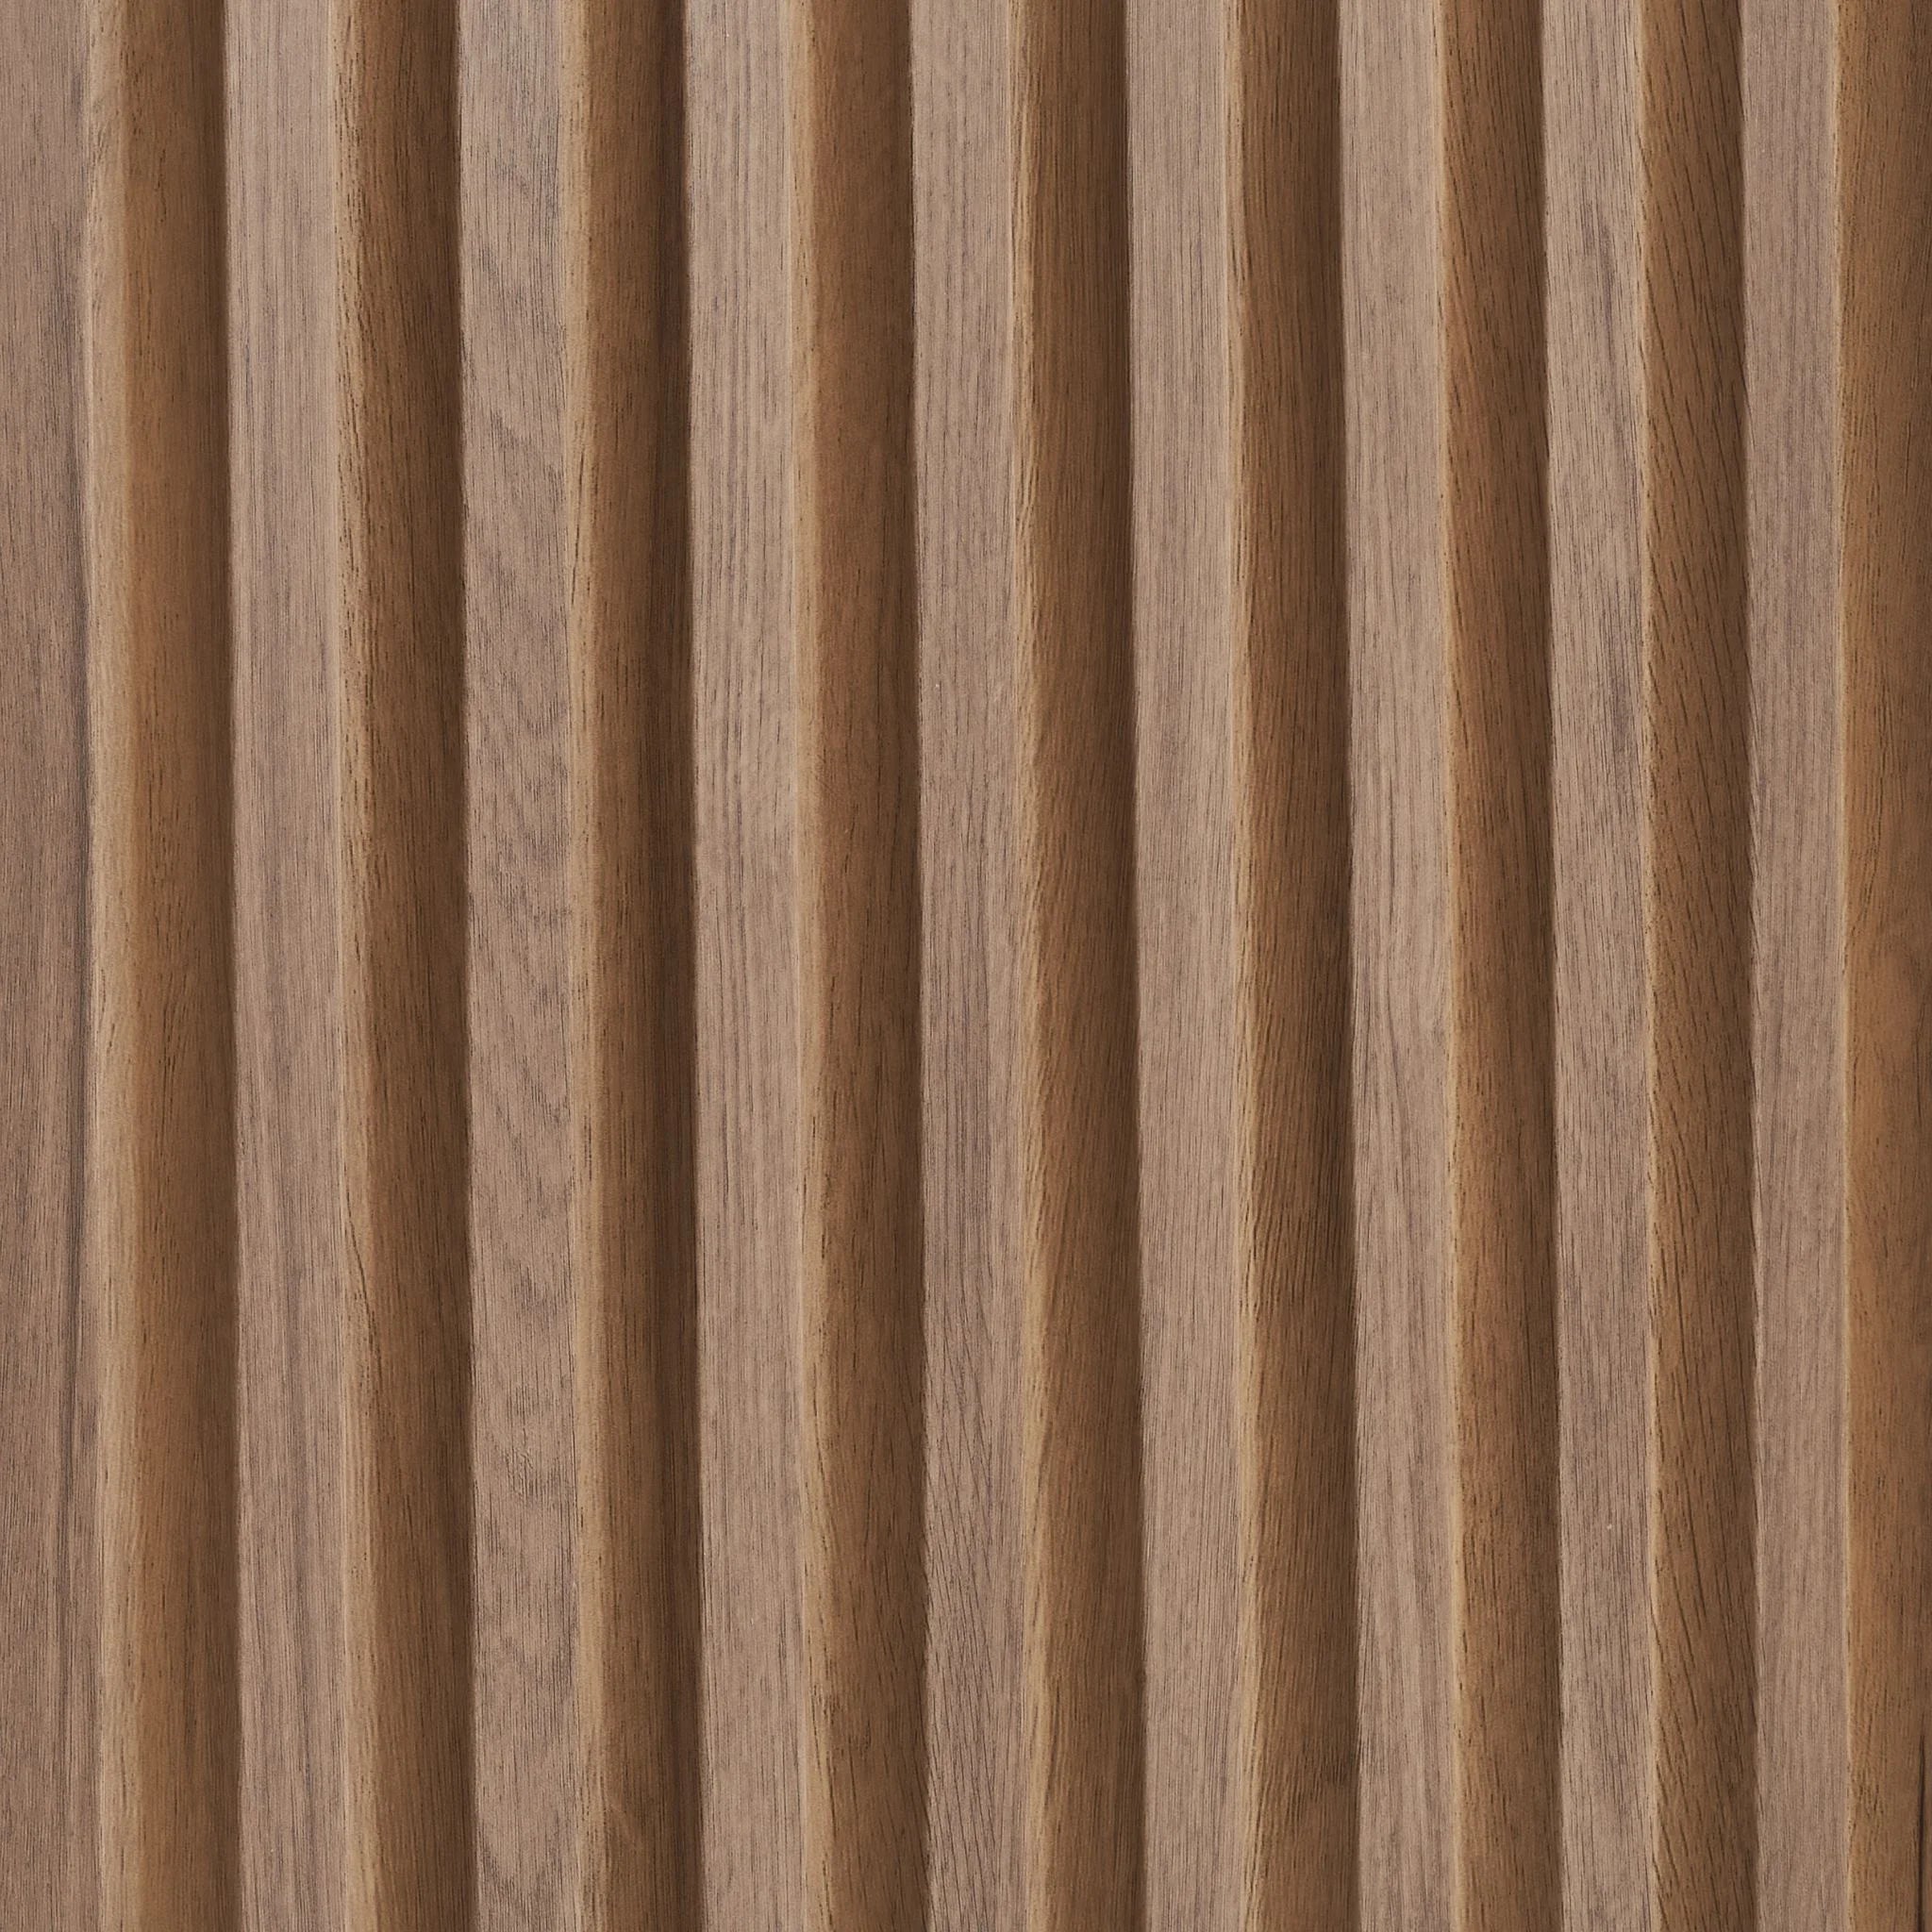 Close-up of wooden PVC wall panel with vertical ribbed pattern